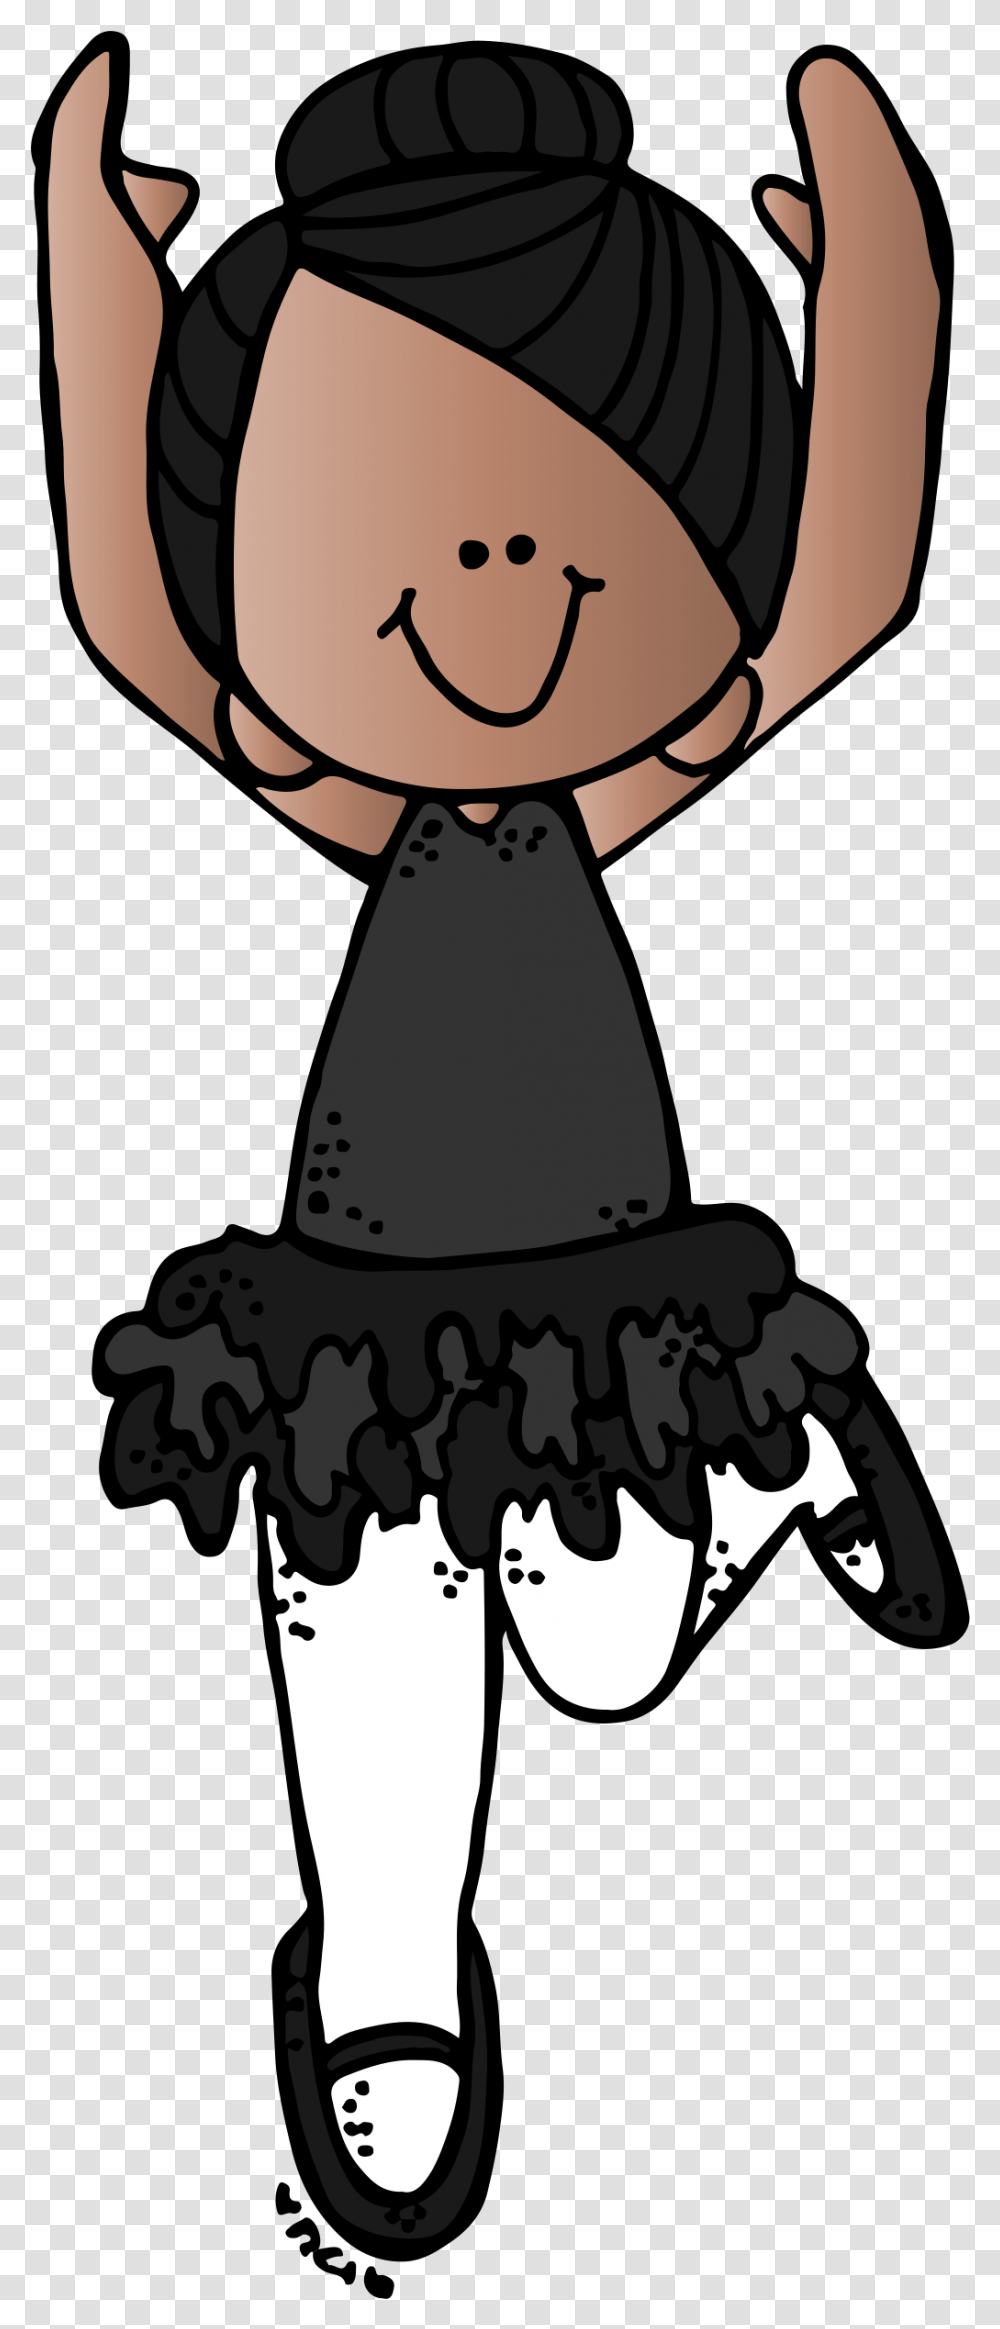 If Your Child Is Interested In Becoming An Act In The Imagenes De Talentos Animados, Hook, Claw Transparent Png